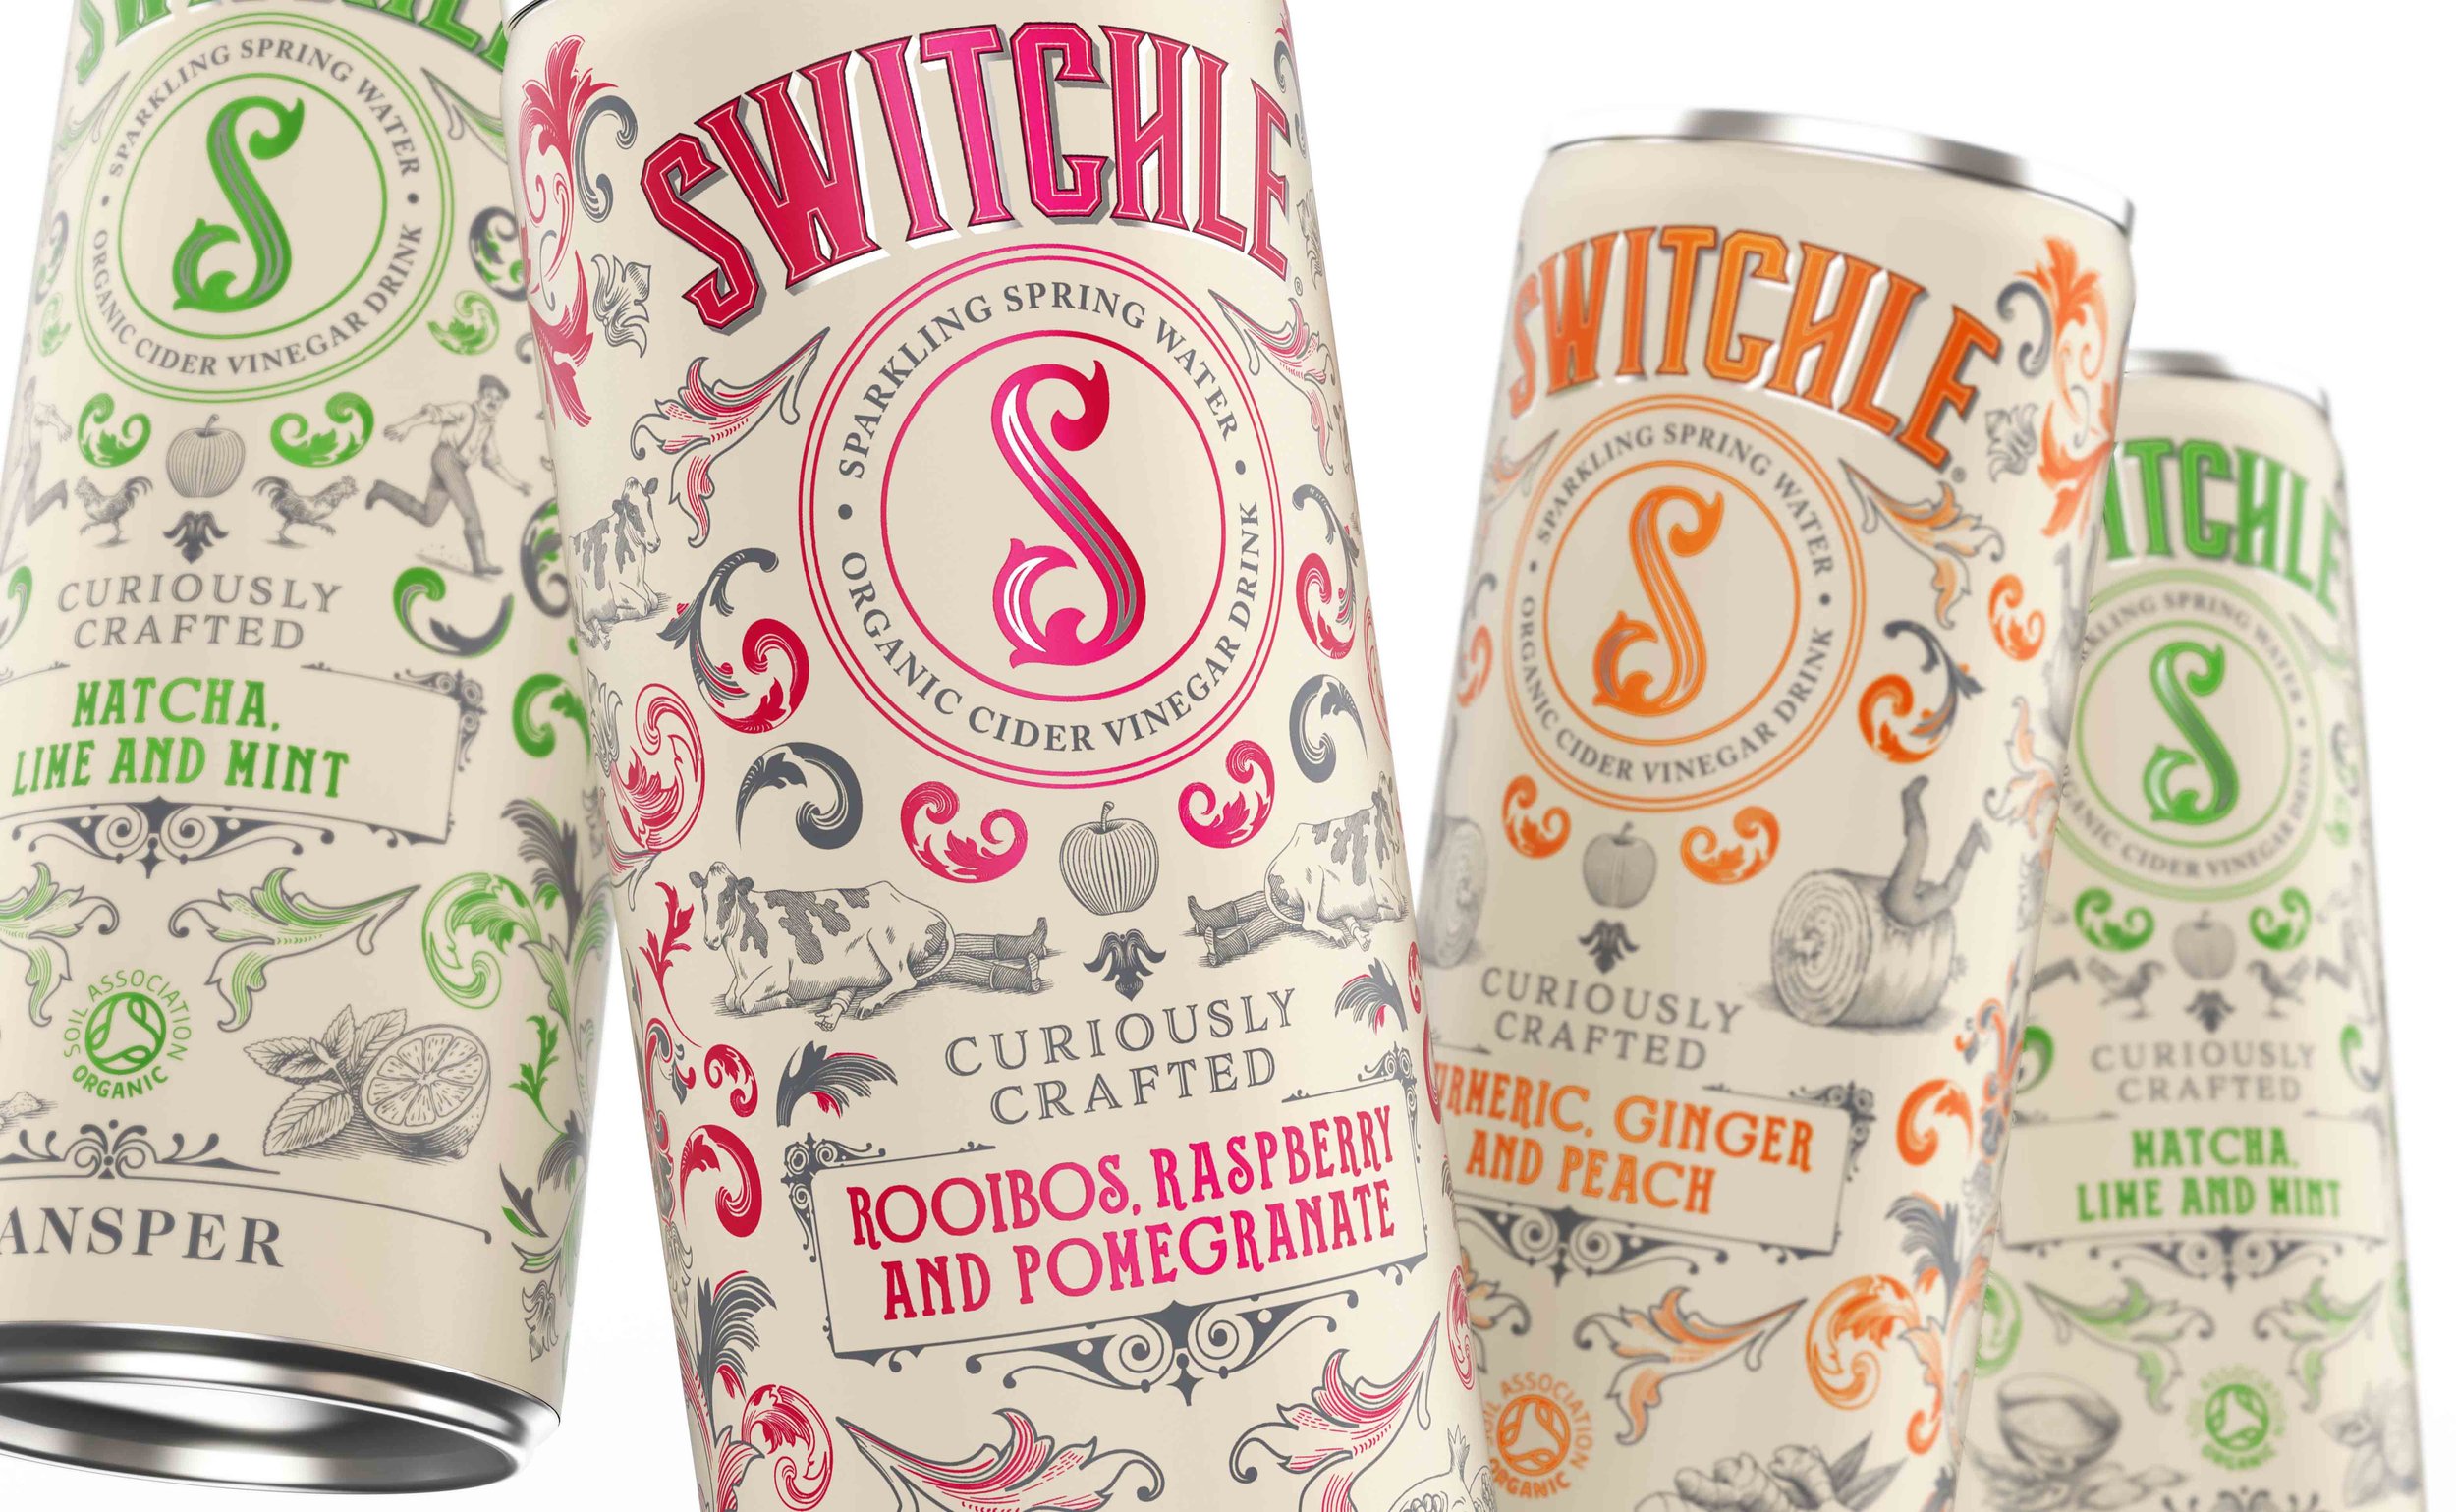  Beautiful and Curiously Crafted, Distinctive & Eccentrically British Drink Range